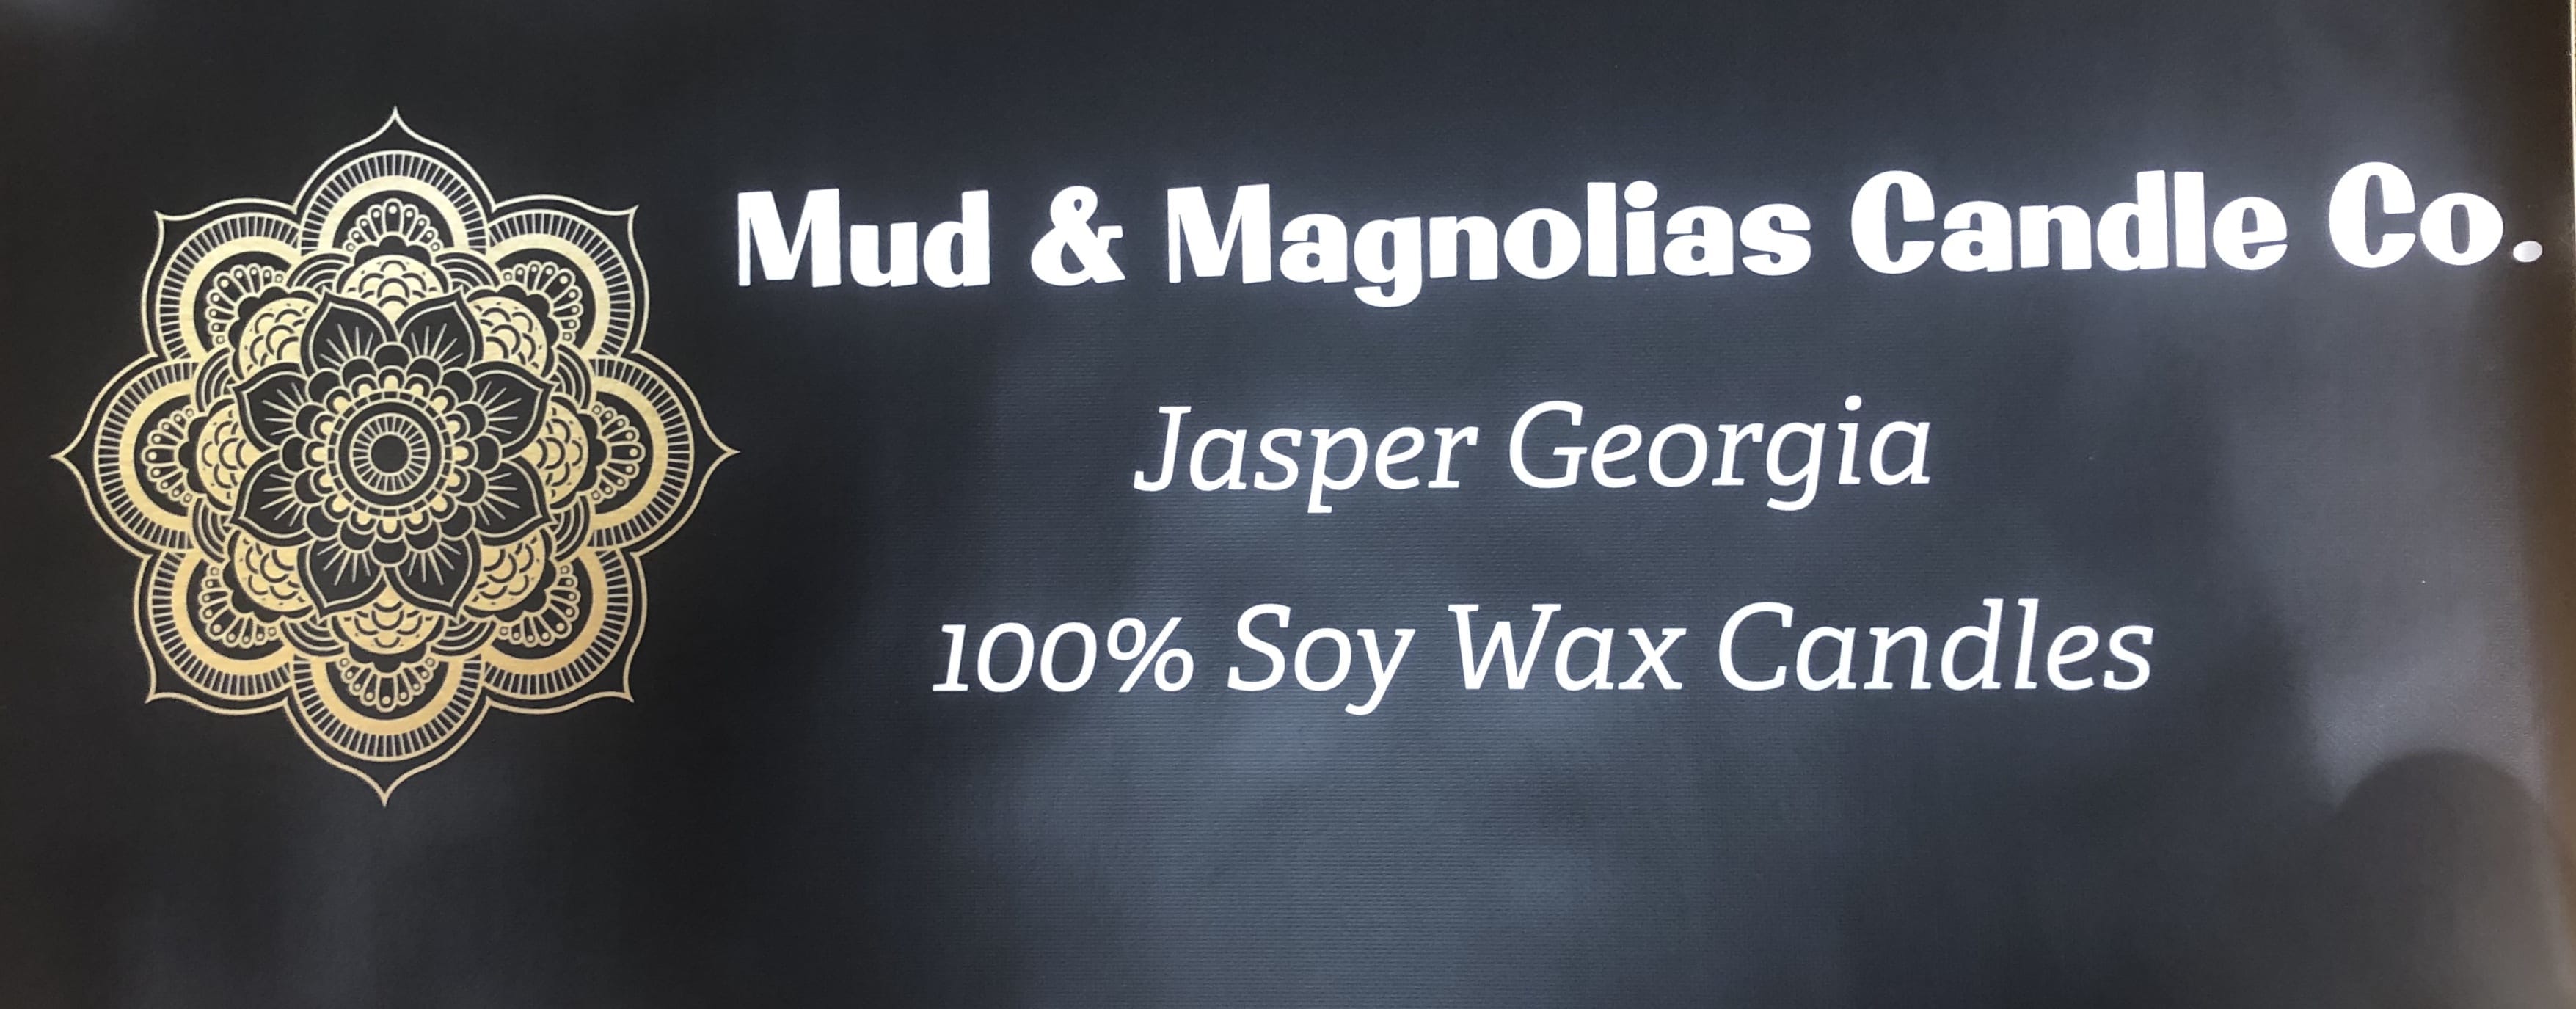 Mud And Magnolias Candle Company